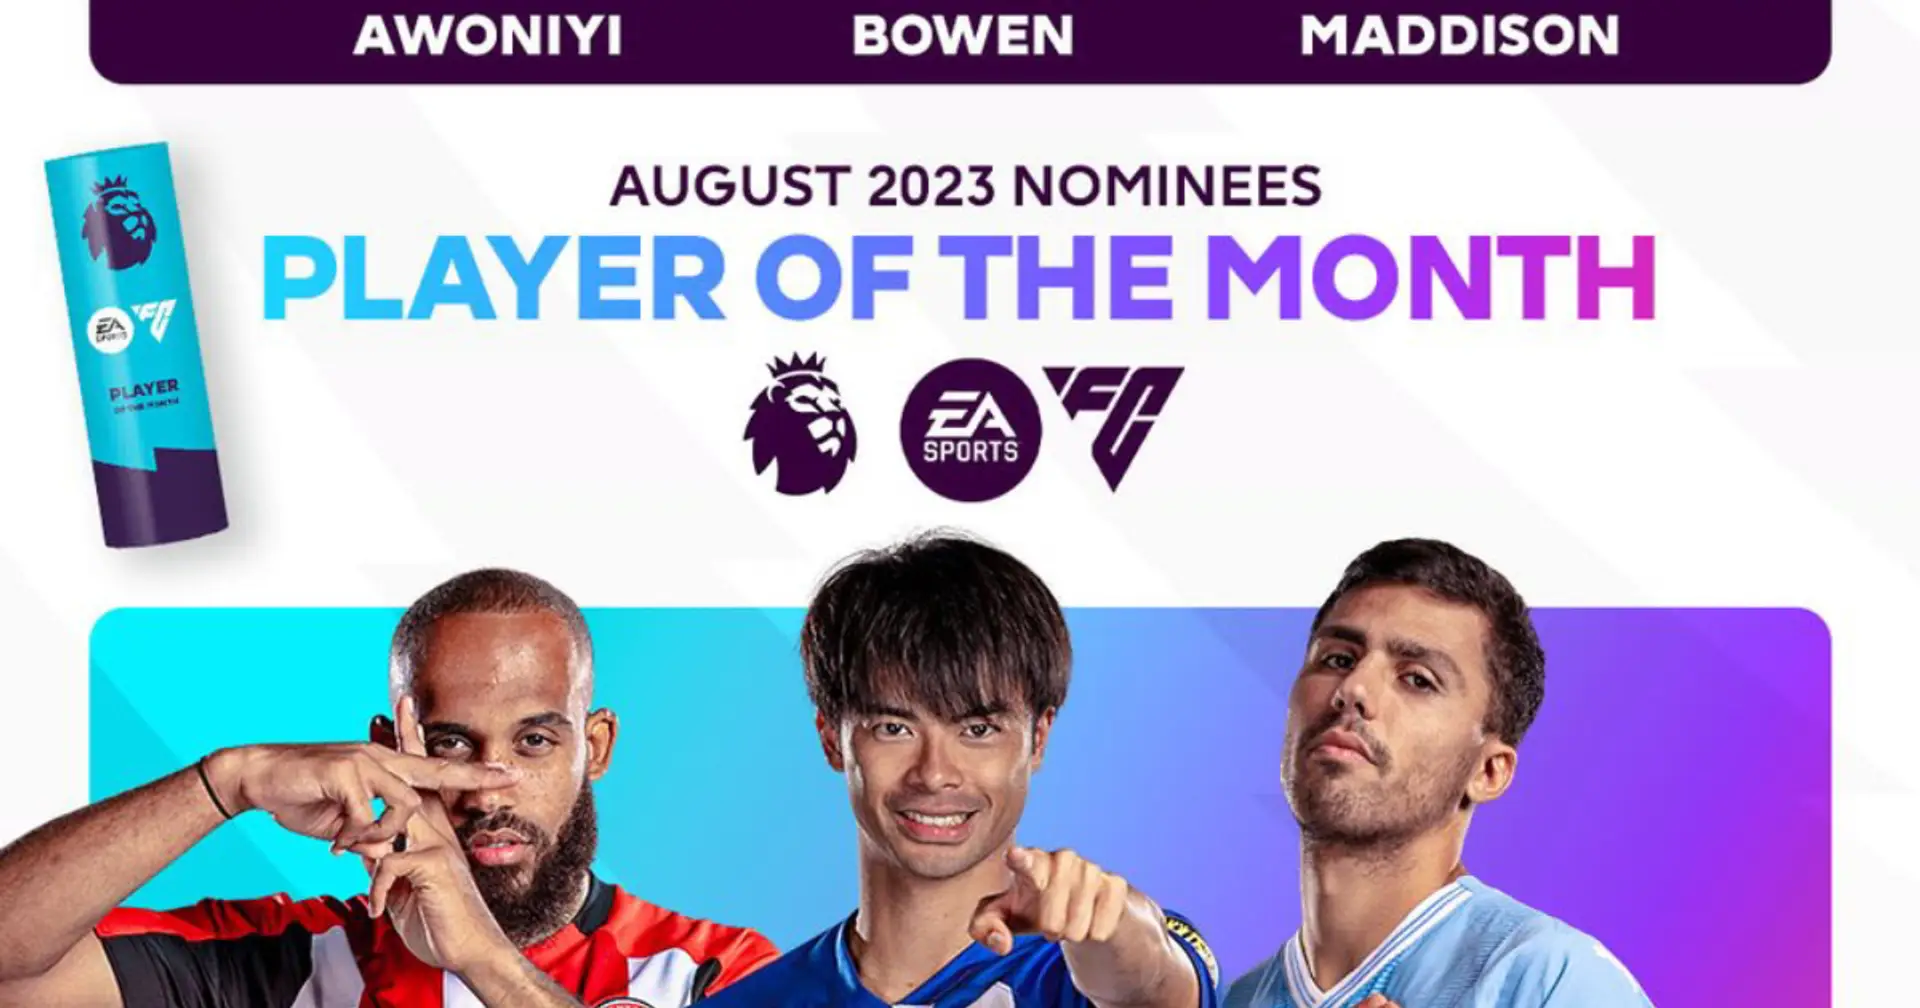 Premier League announce Player of the Month nominees — no Arsenal stars included